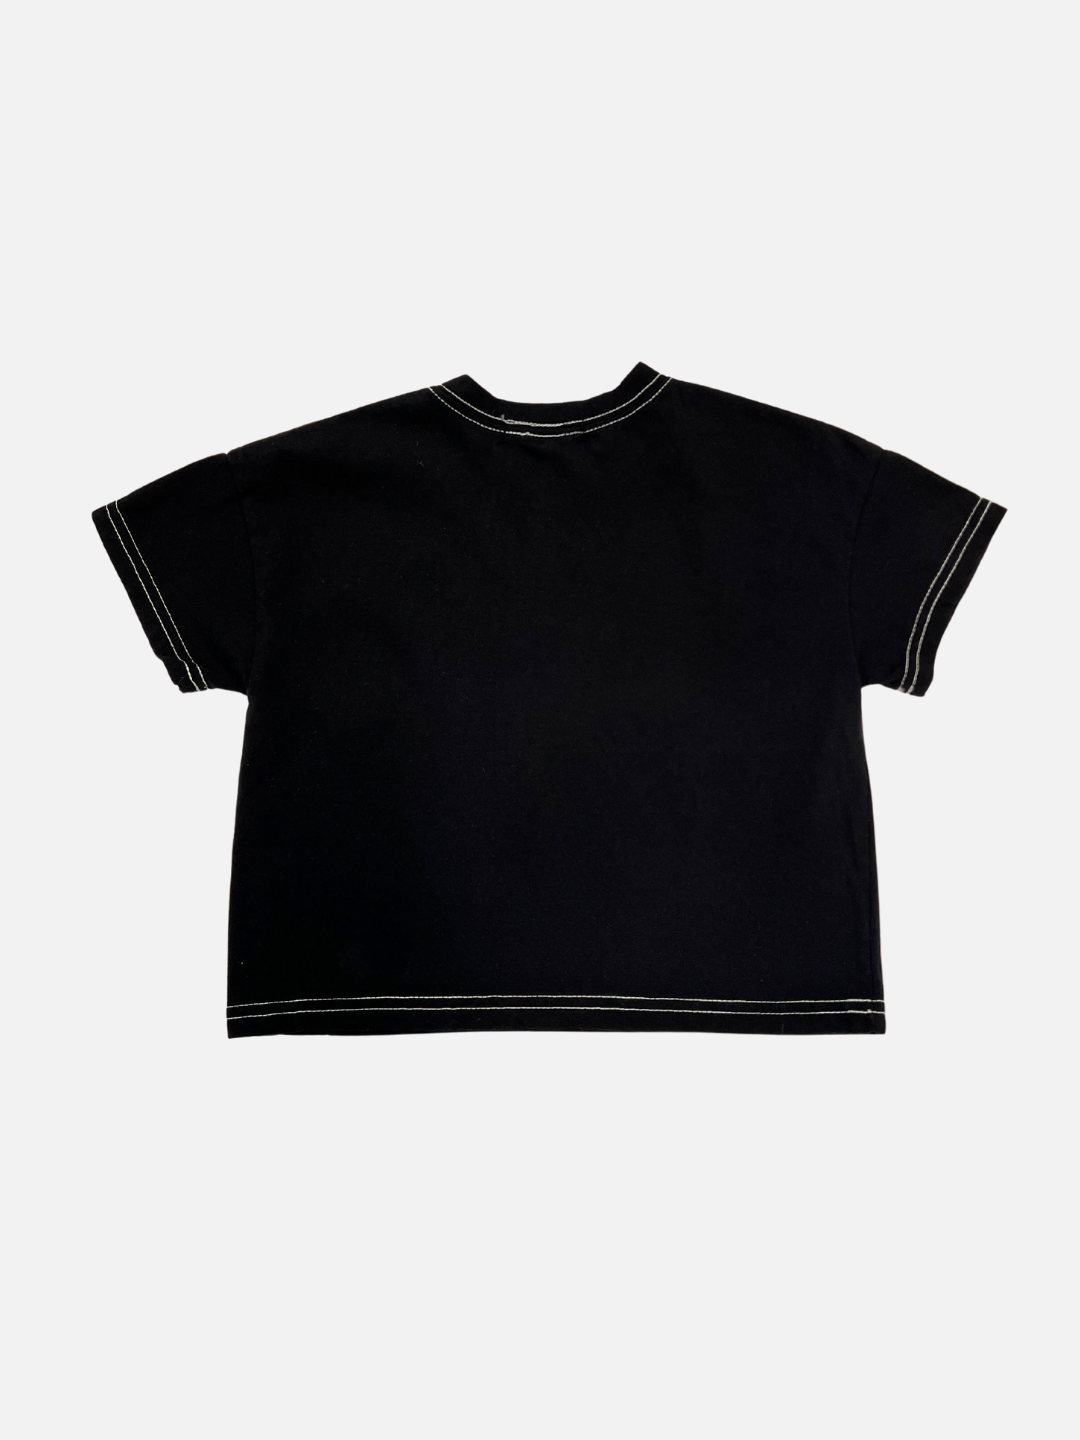 Back view of the kids' stitch pocket tee in Black featuring contrast white stitch